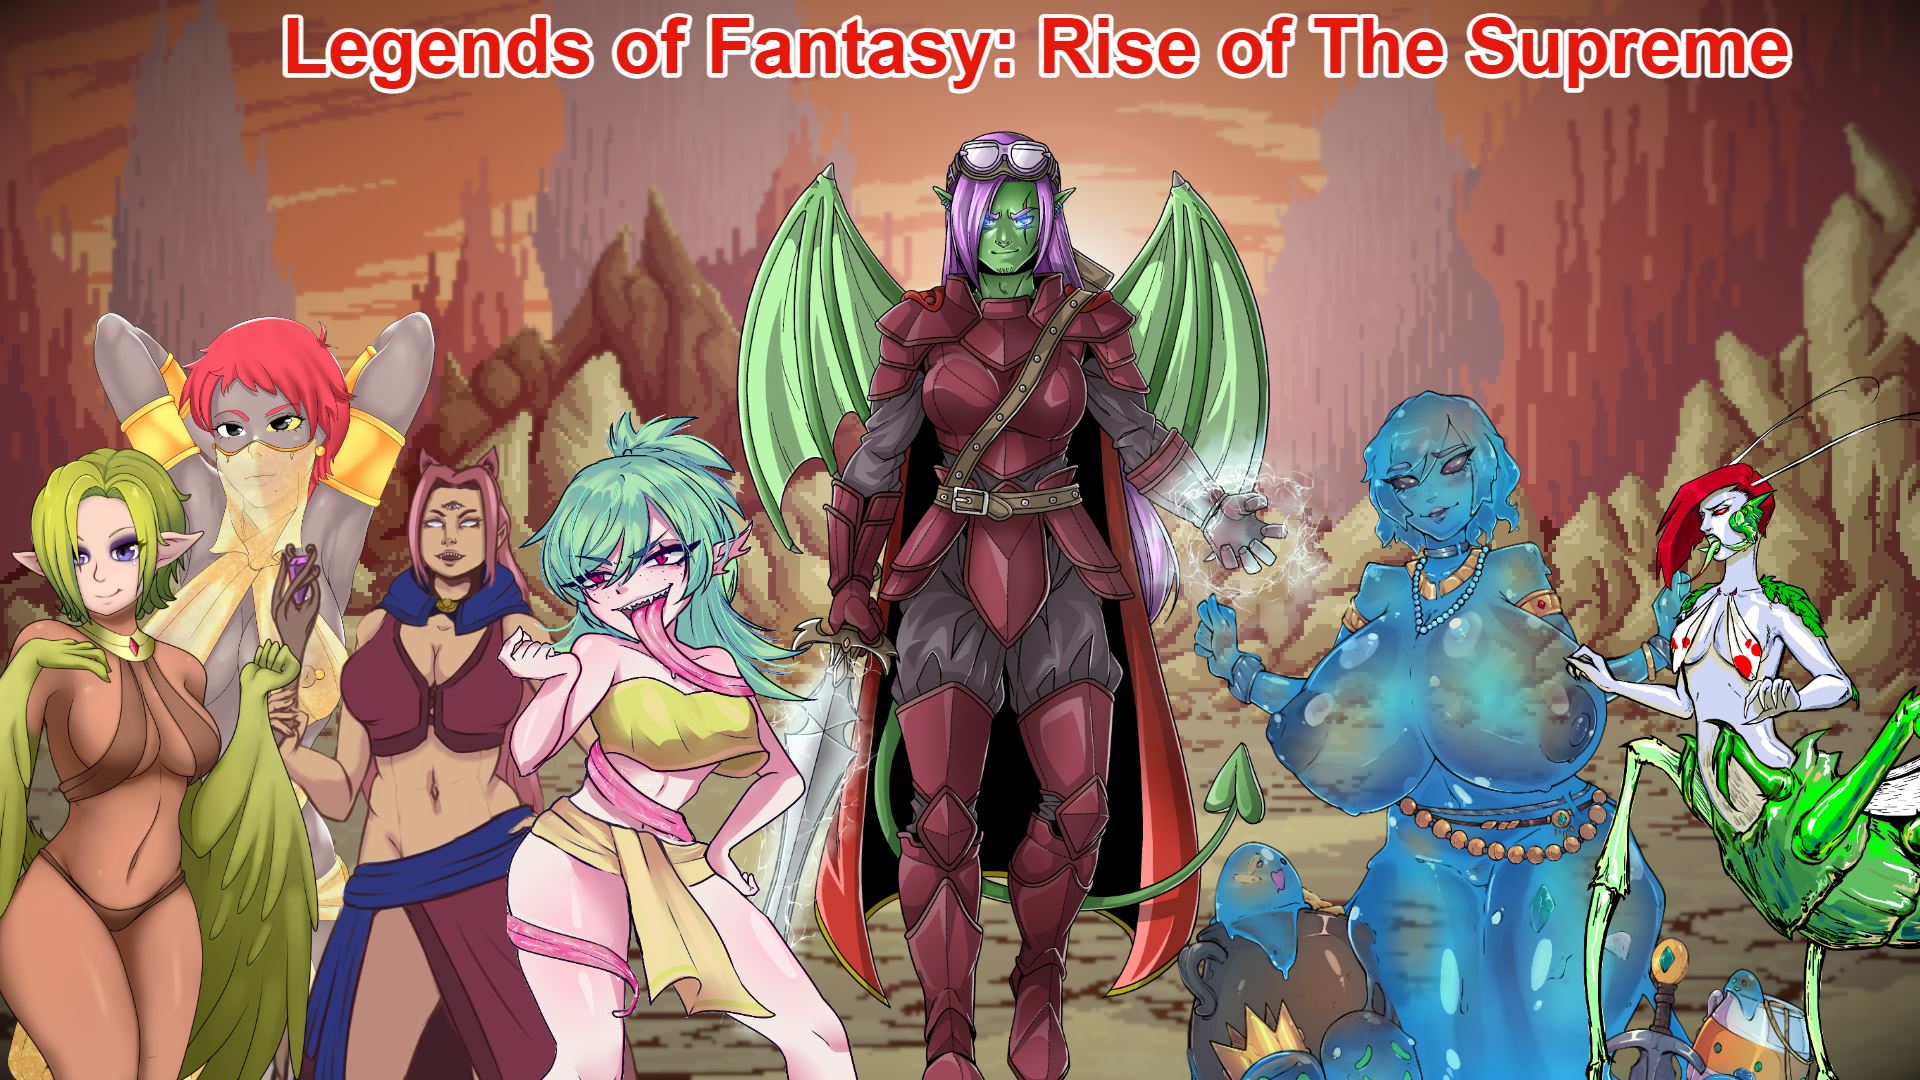 RPGM] Legends of Fantasy: Rise of the Supreme - v1.1 by  ButterflyChainsawProductions 18+ Adult xxx Porn Game Download